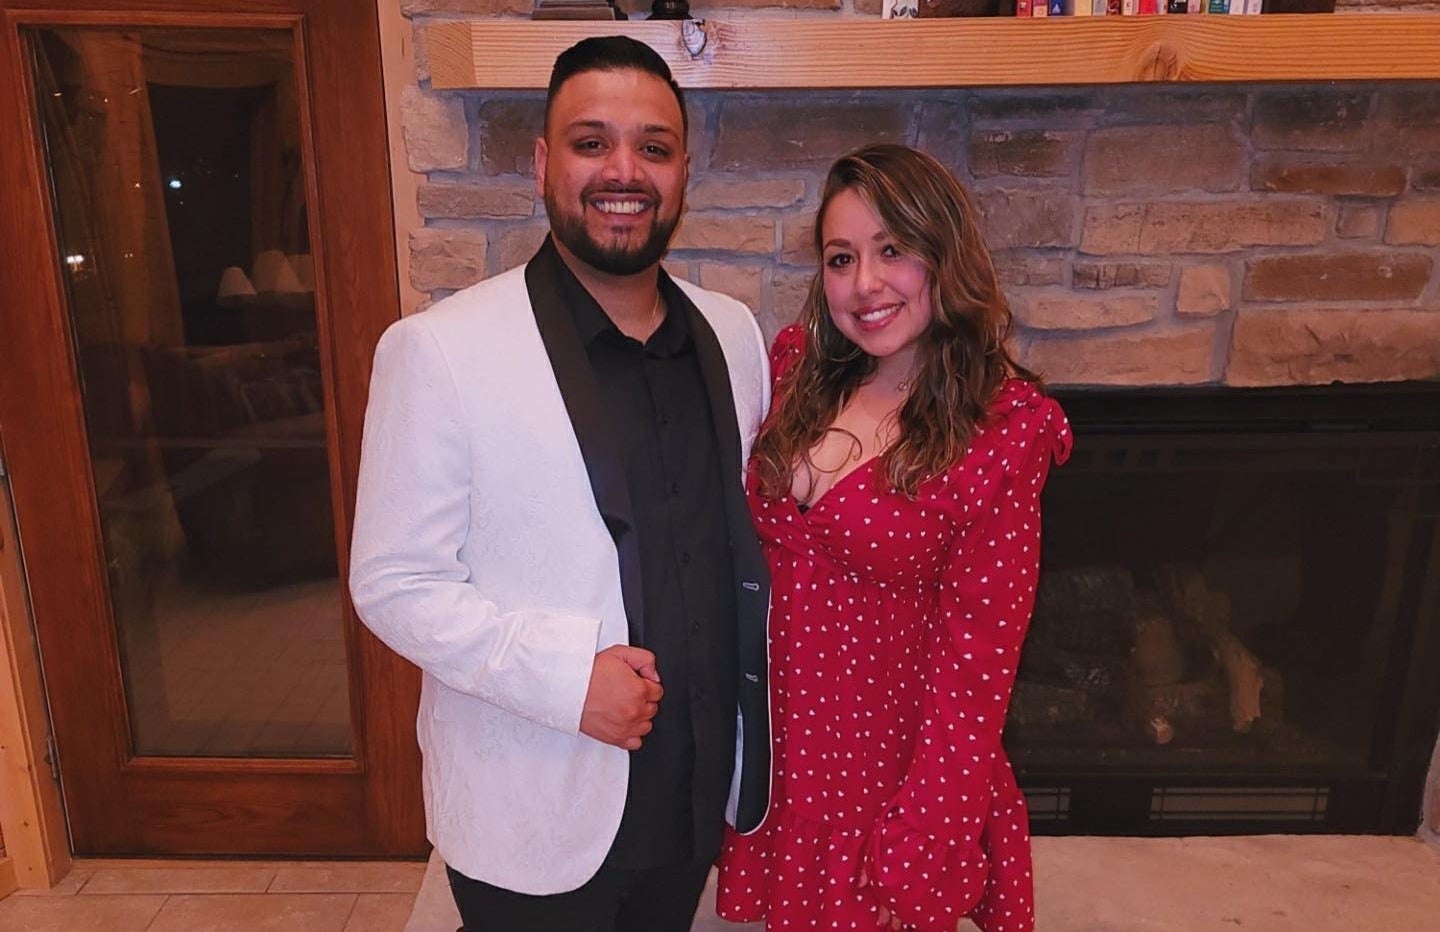 Mirza Danish Baig, one of the victims of the Astroworld festival, died while saving his fiancee